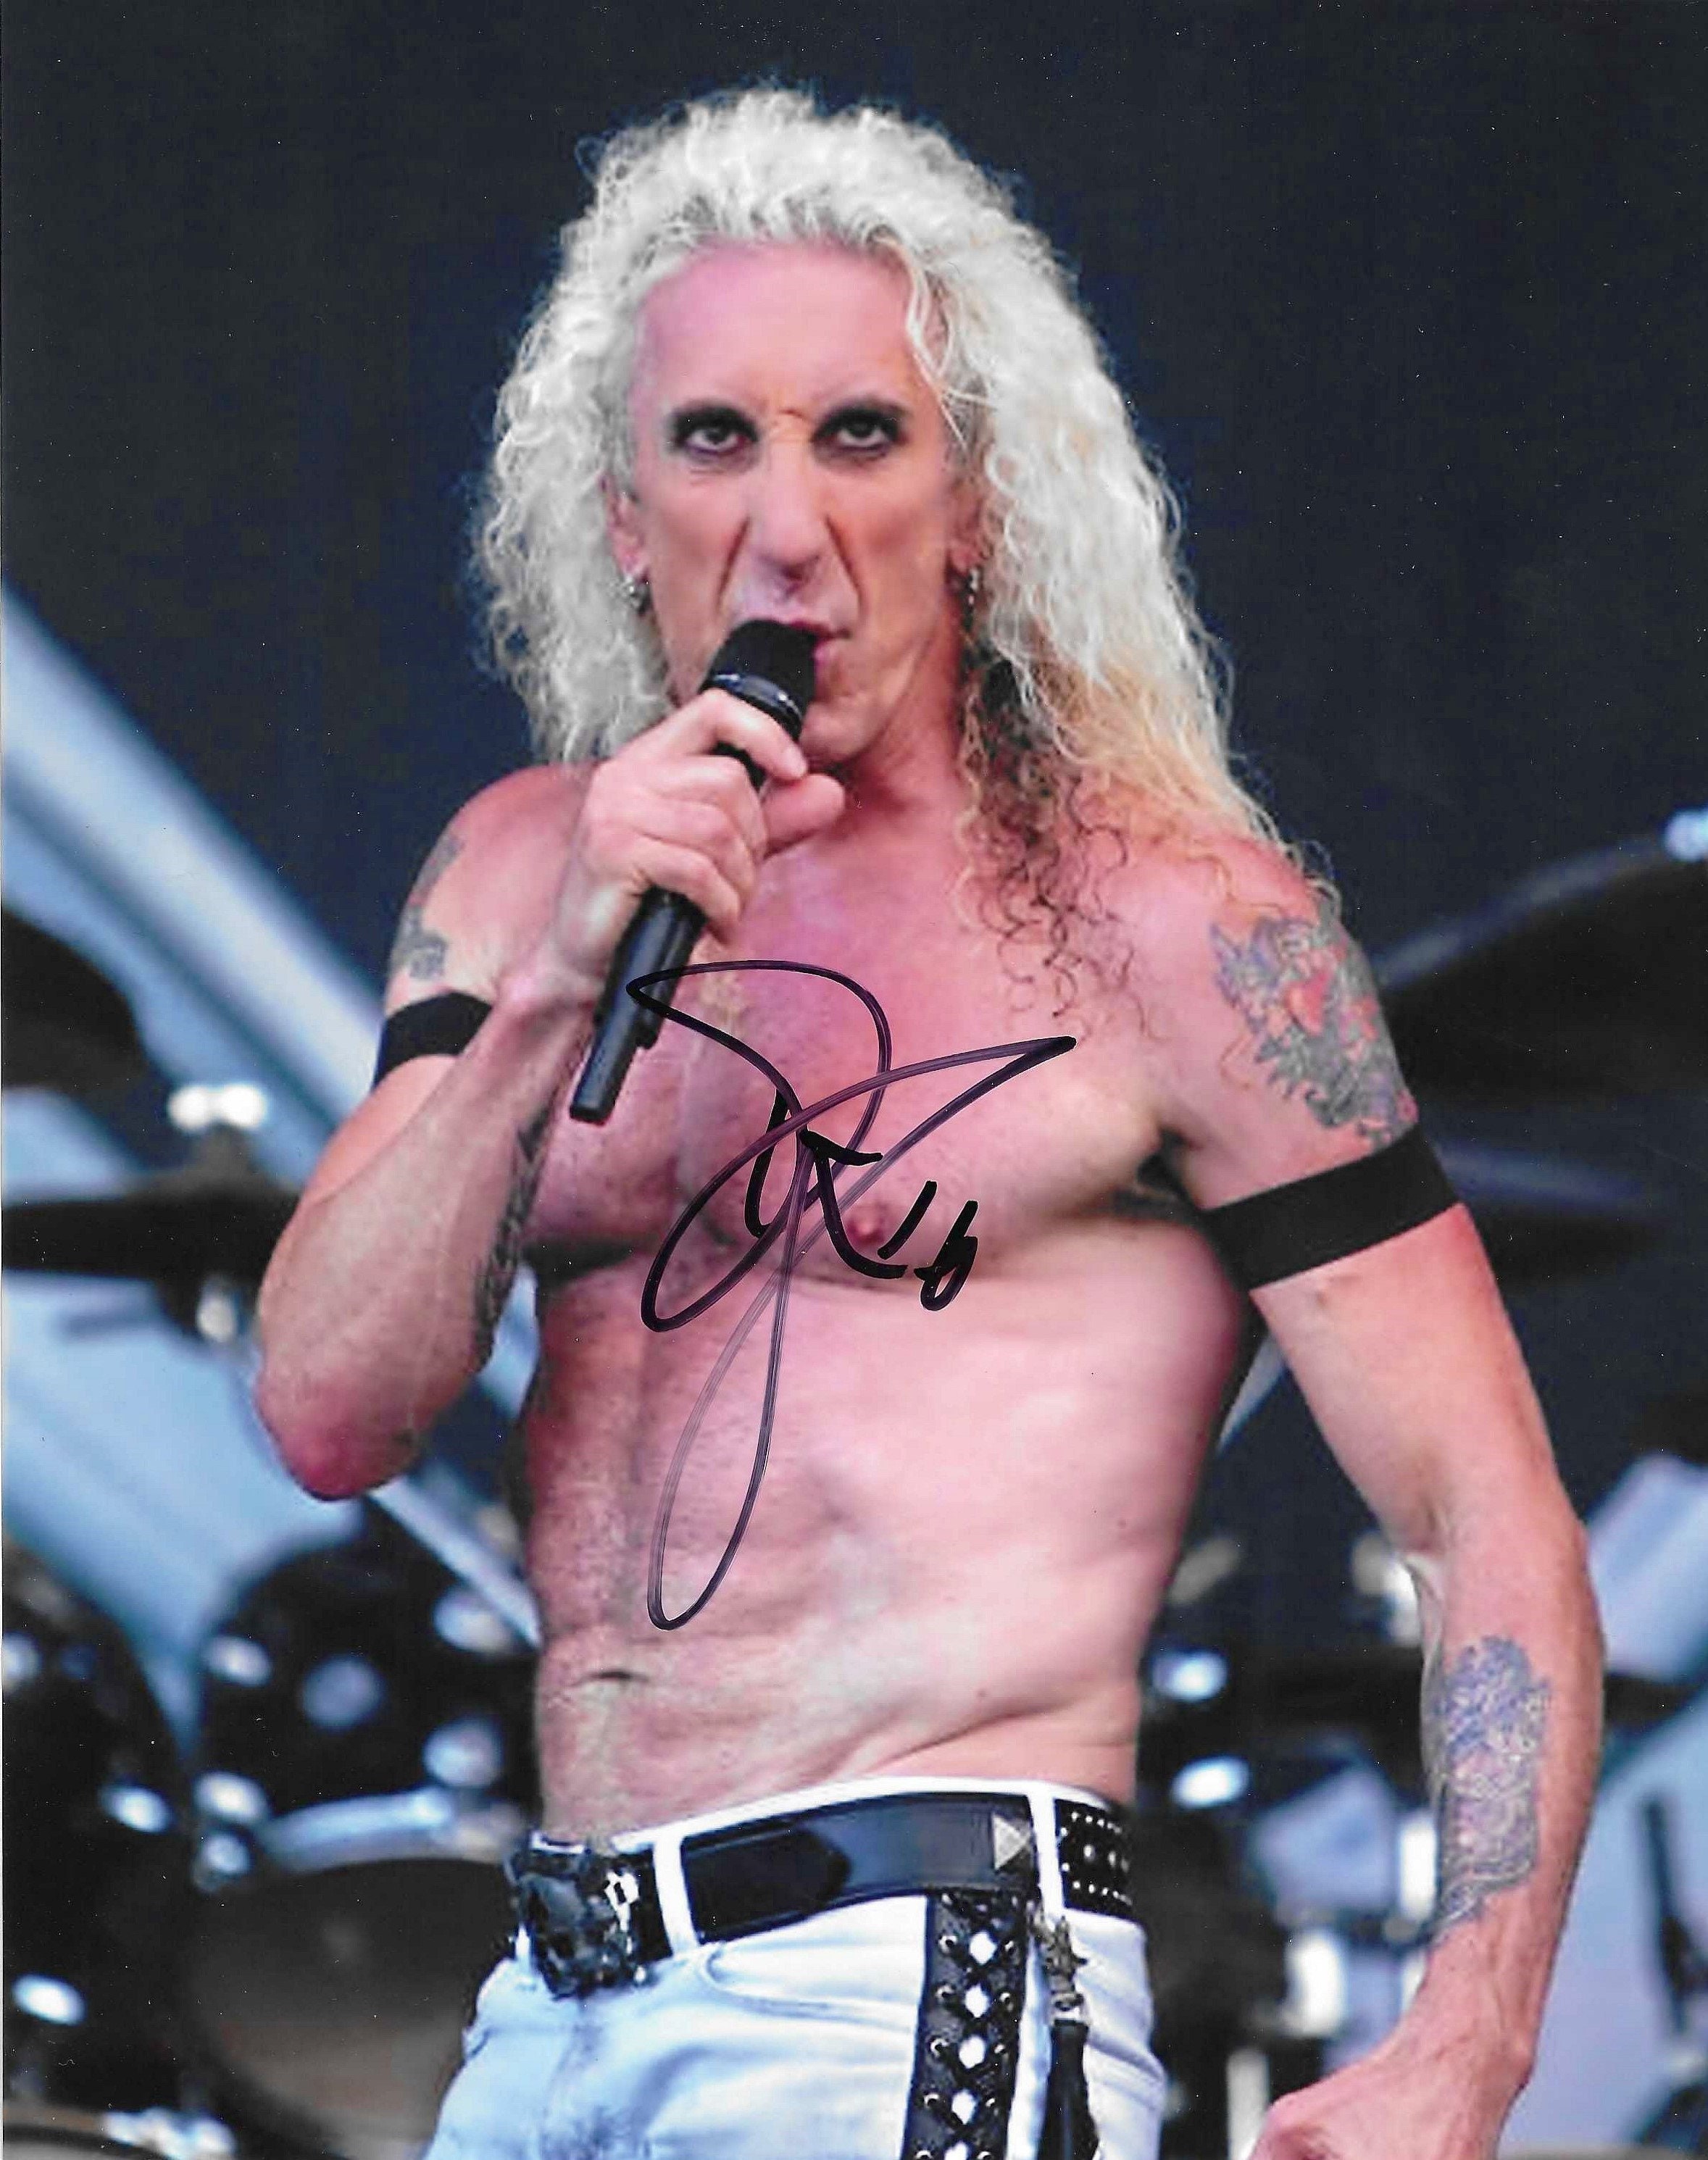 w/COA Twisted Sister Holliston Dee Snider Autographed Signed 8x10 Photo 